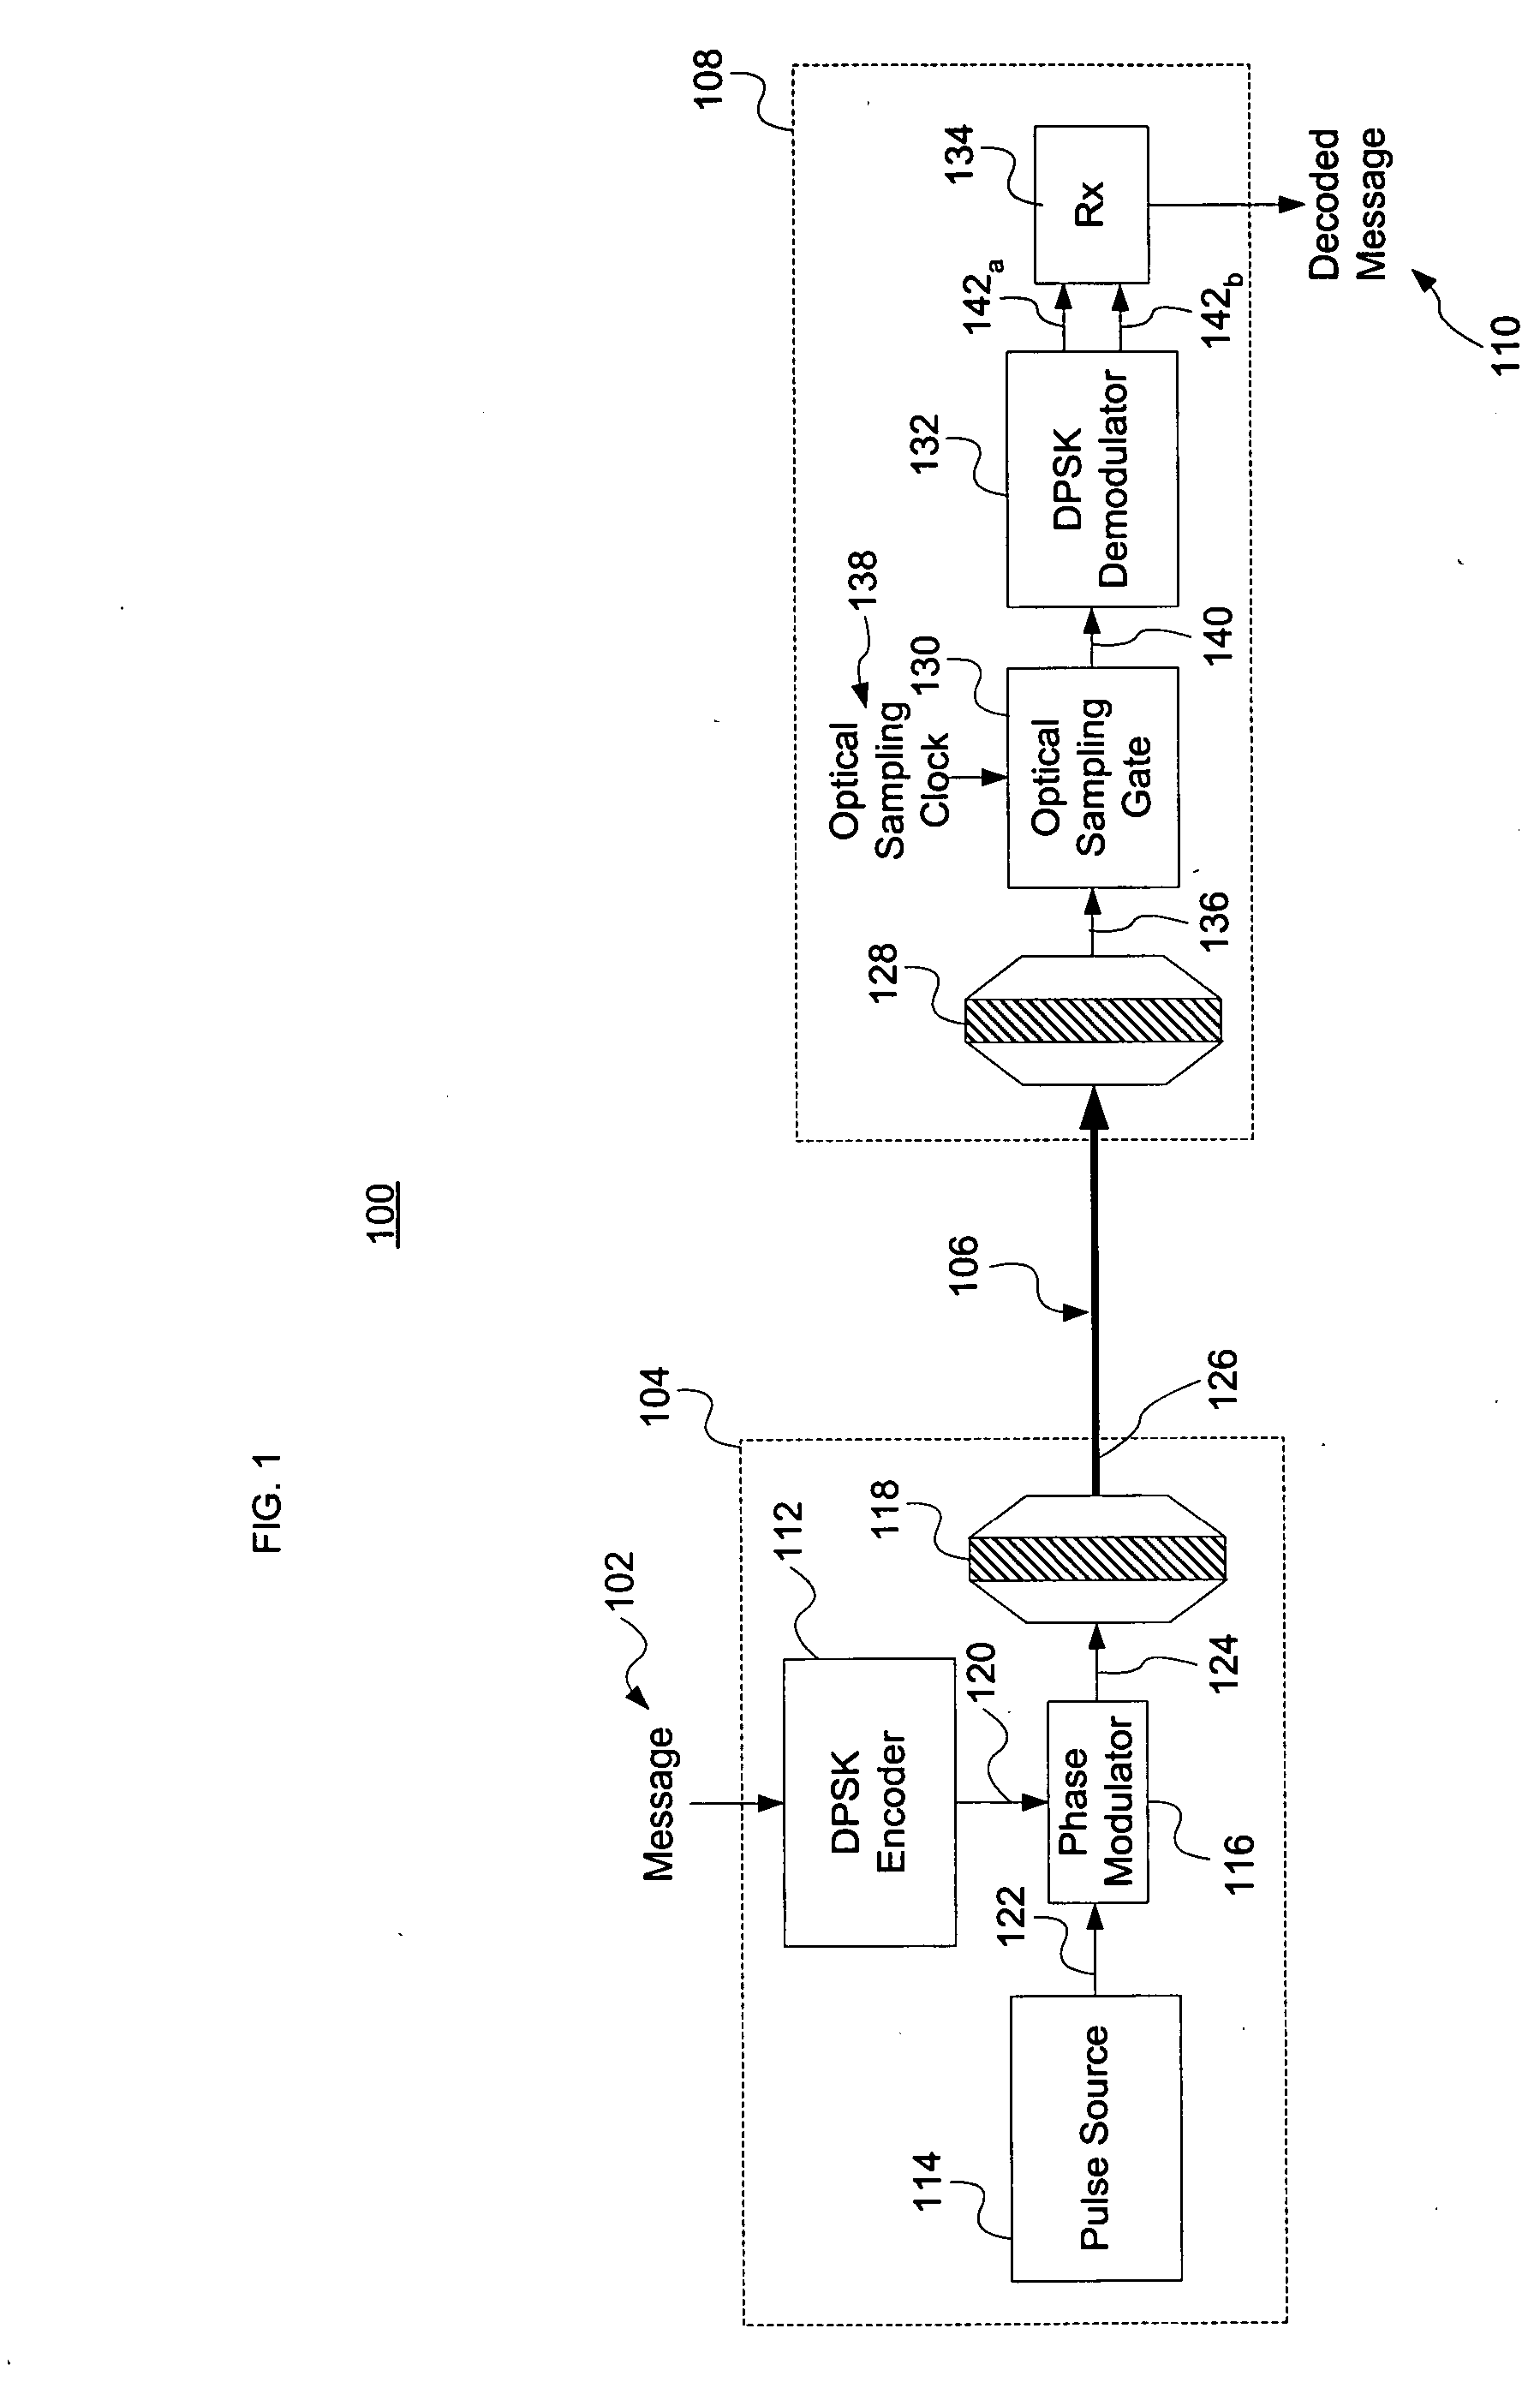 Multi-wavelength optical CDMA with differential encoding and bipolar differential detection